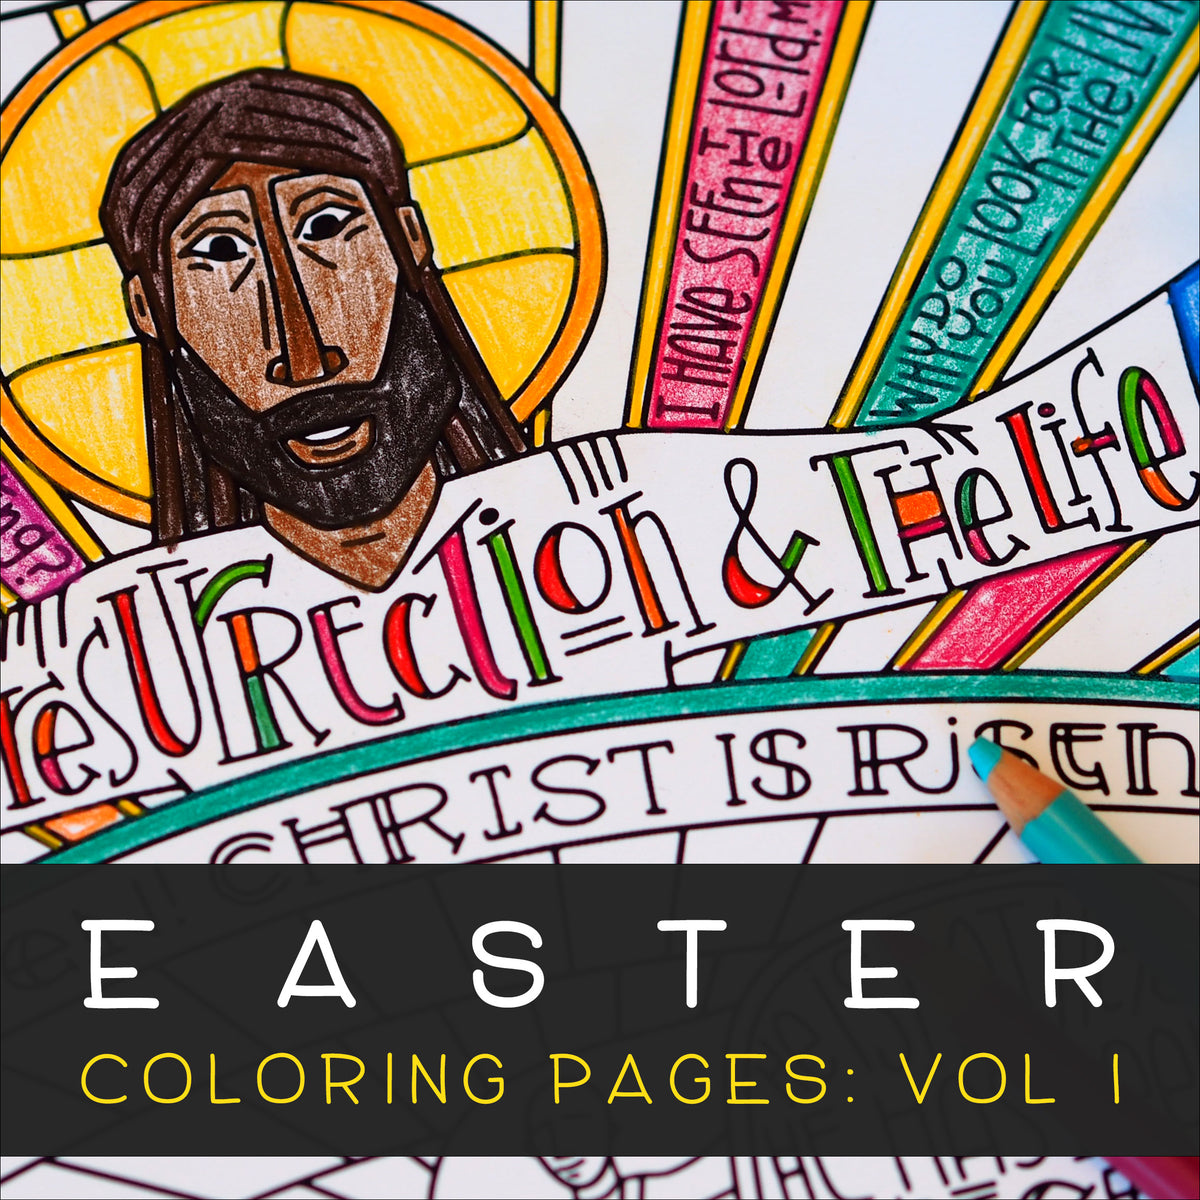 resurrection coloring page